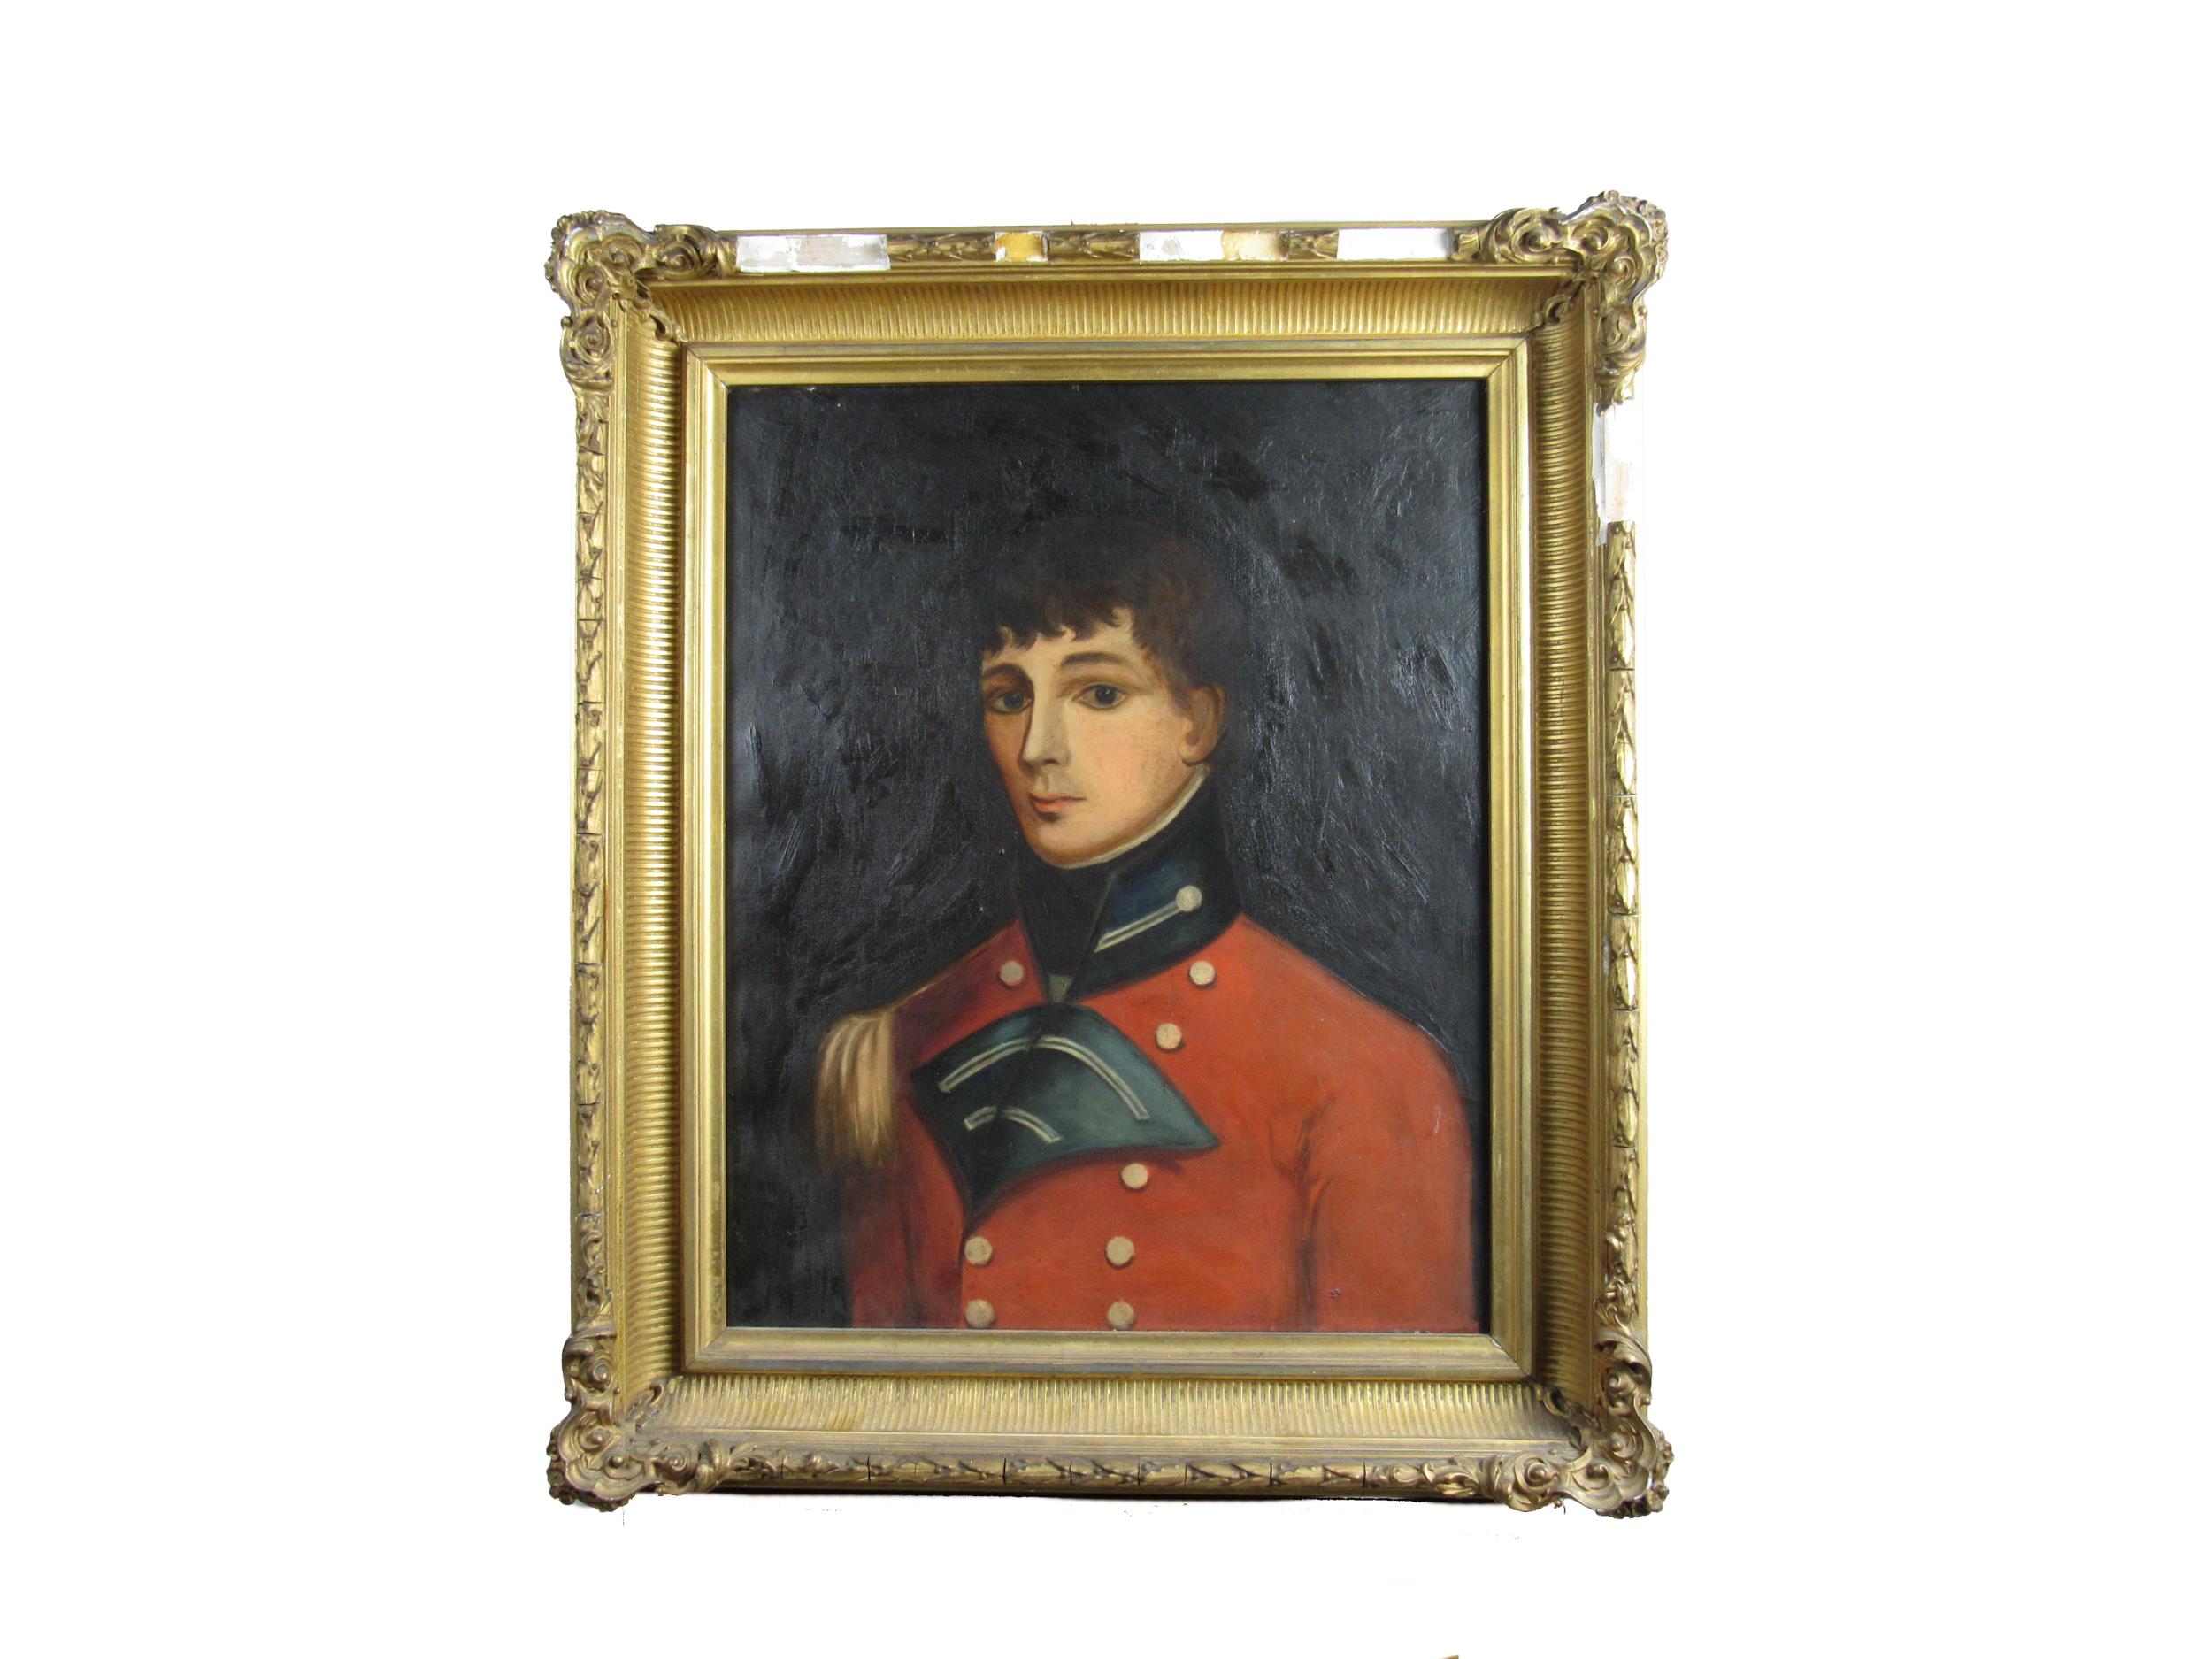 19th Century Naive Irish School "Henry Preston - Captain 30th Regiment," (killed aged 19 in a duel), - Image 2 of 2